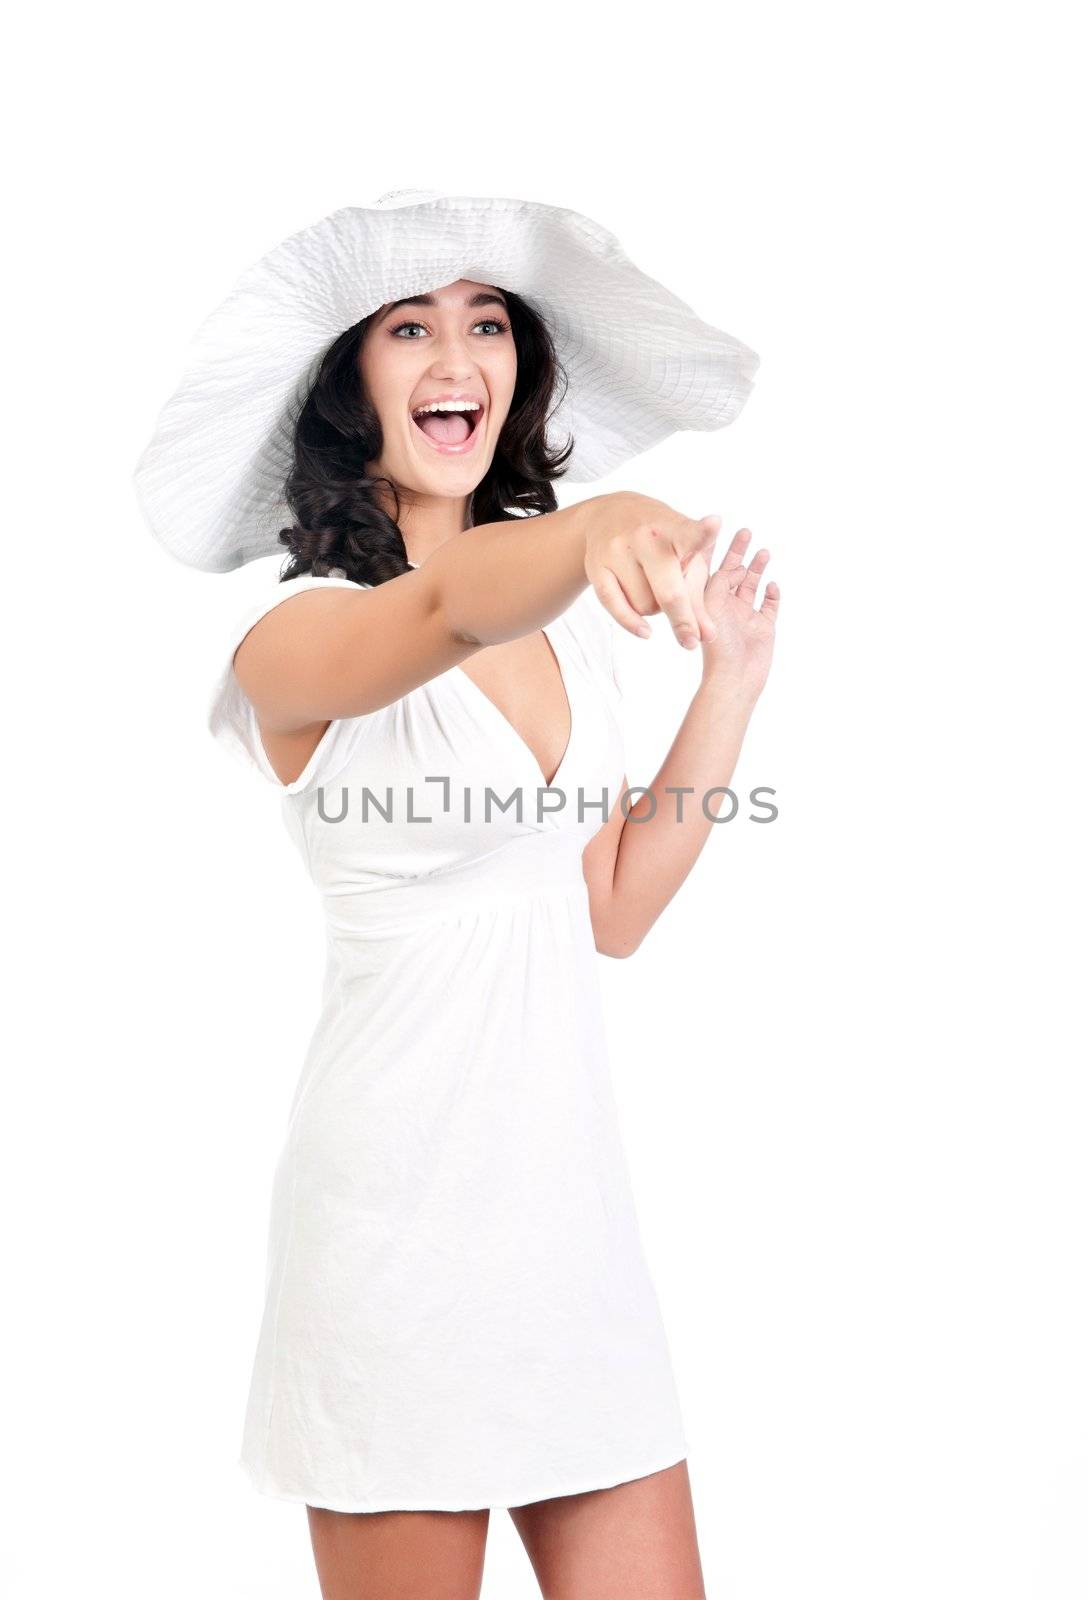 young woman in white dress and hat by clearviewstock